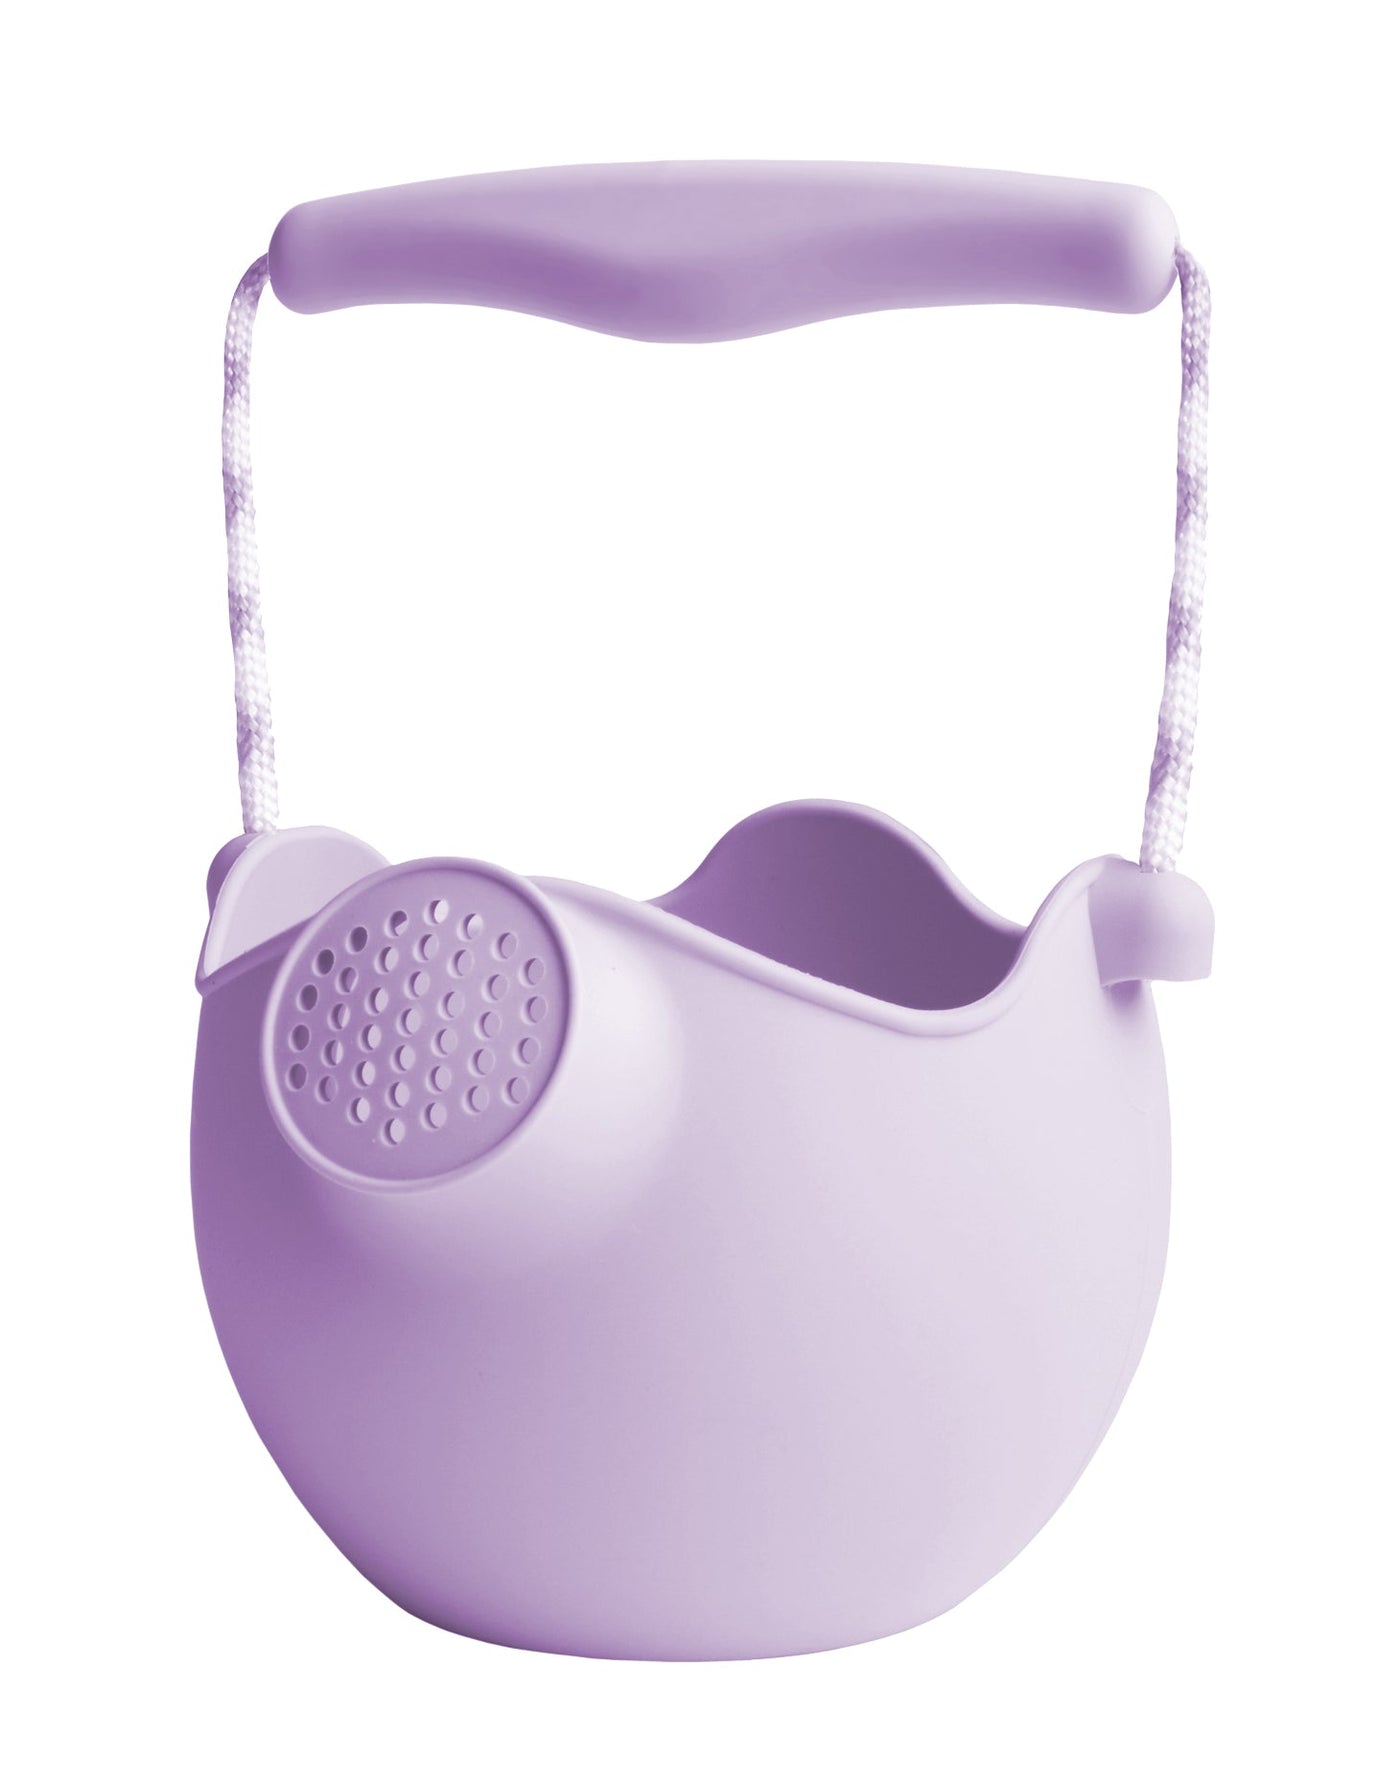 Scrunch Watering Can - Lavender Watering Can Scrunch 